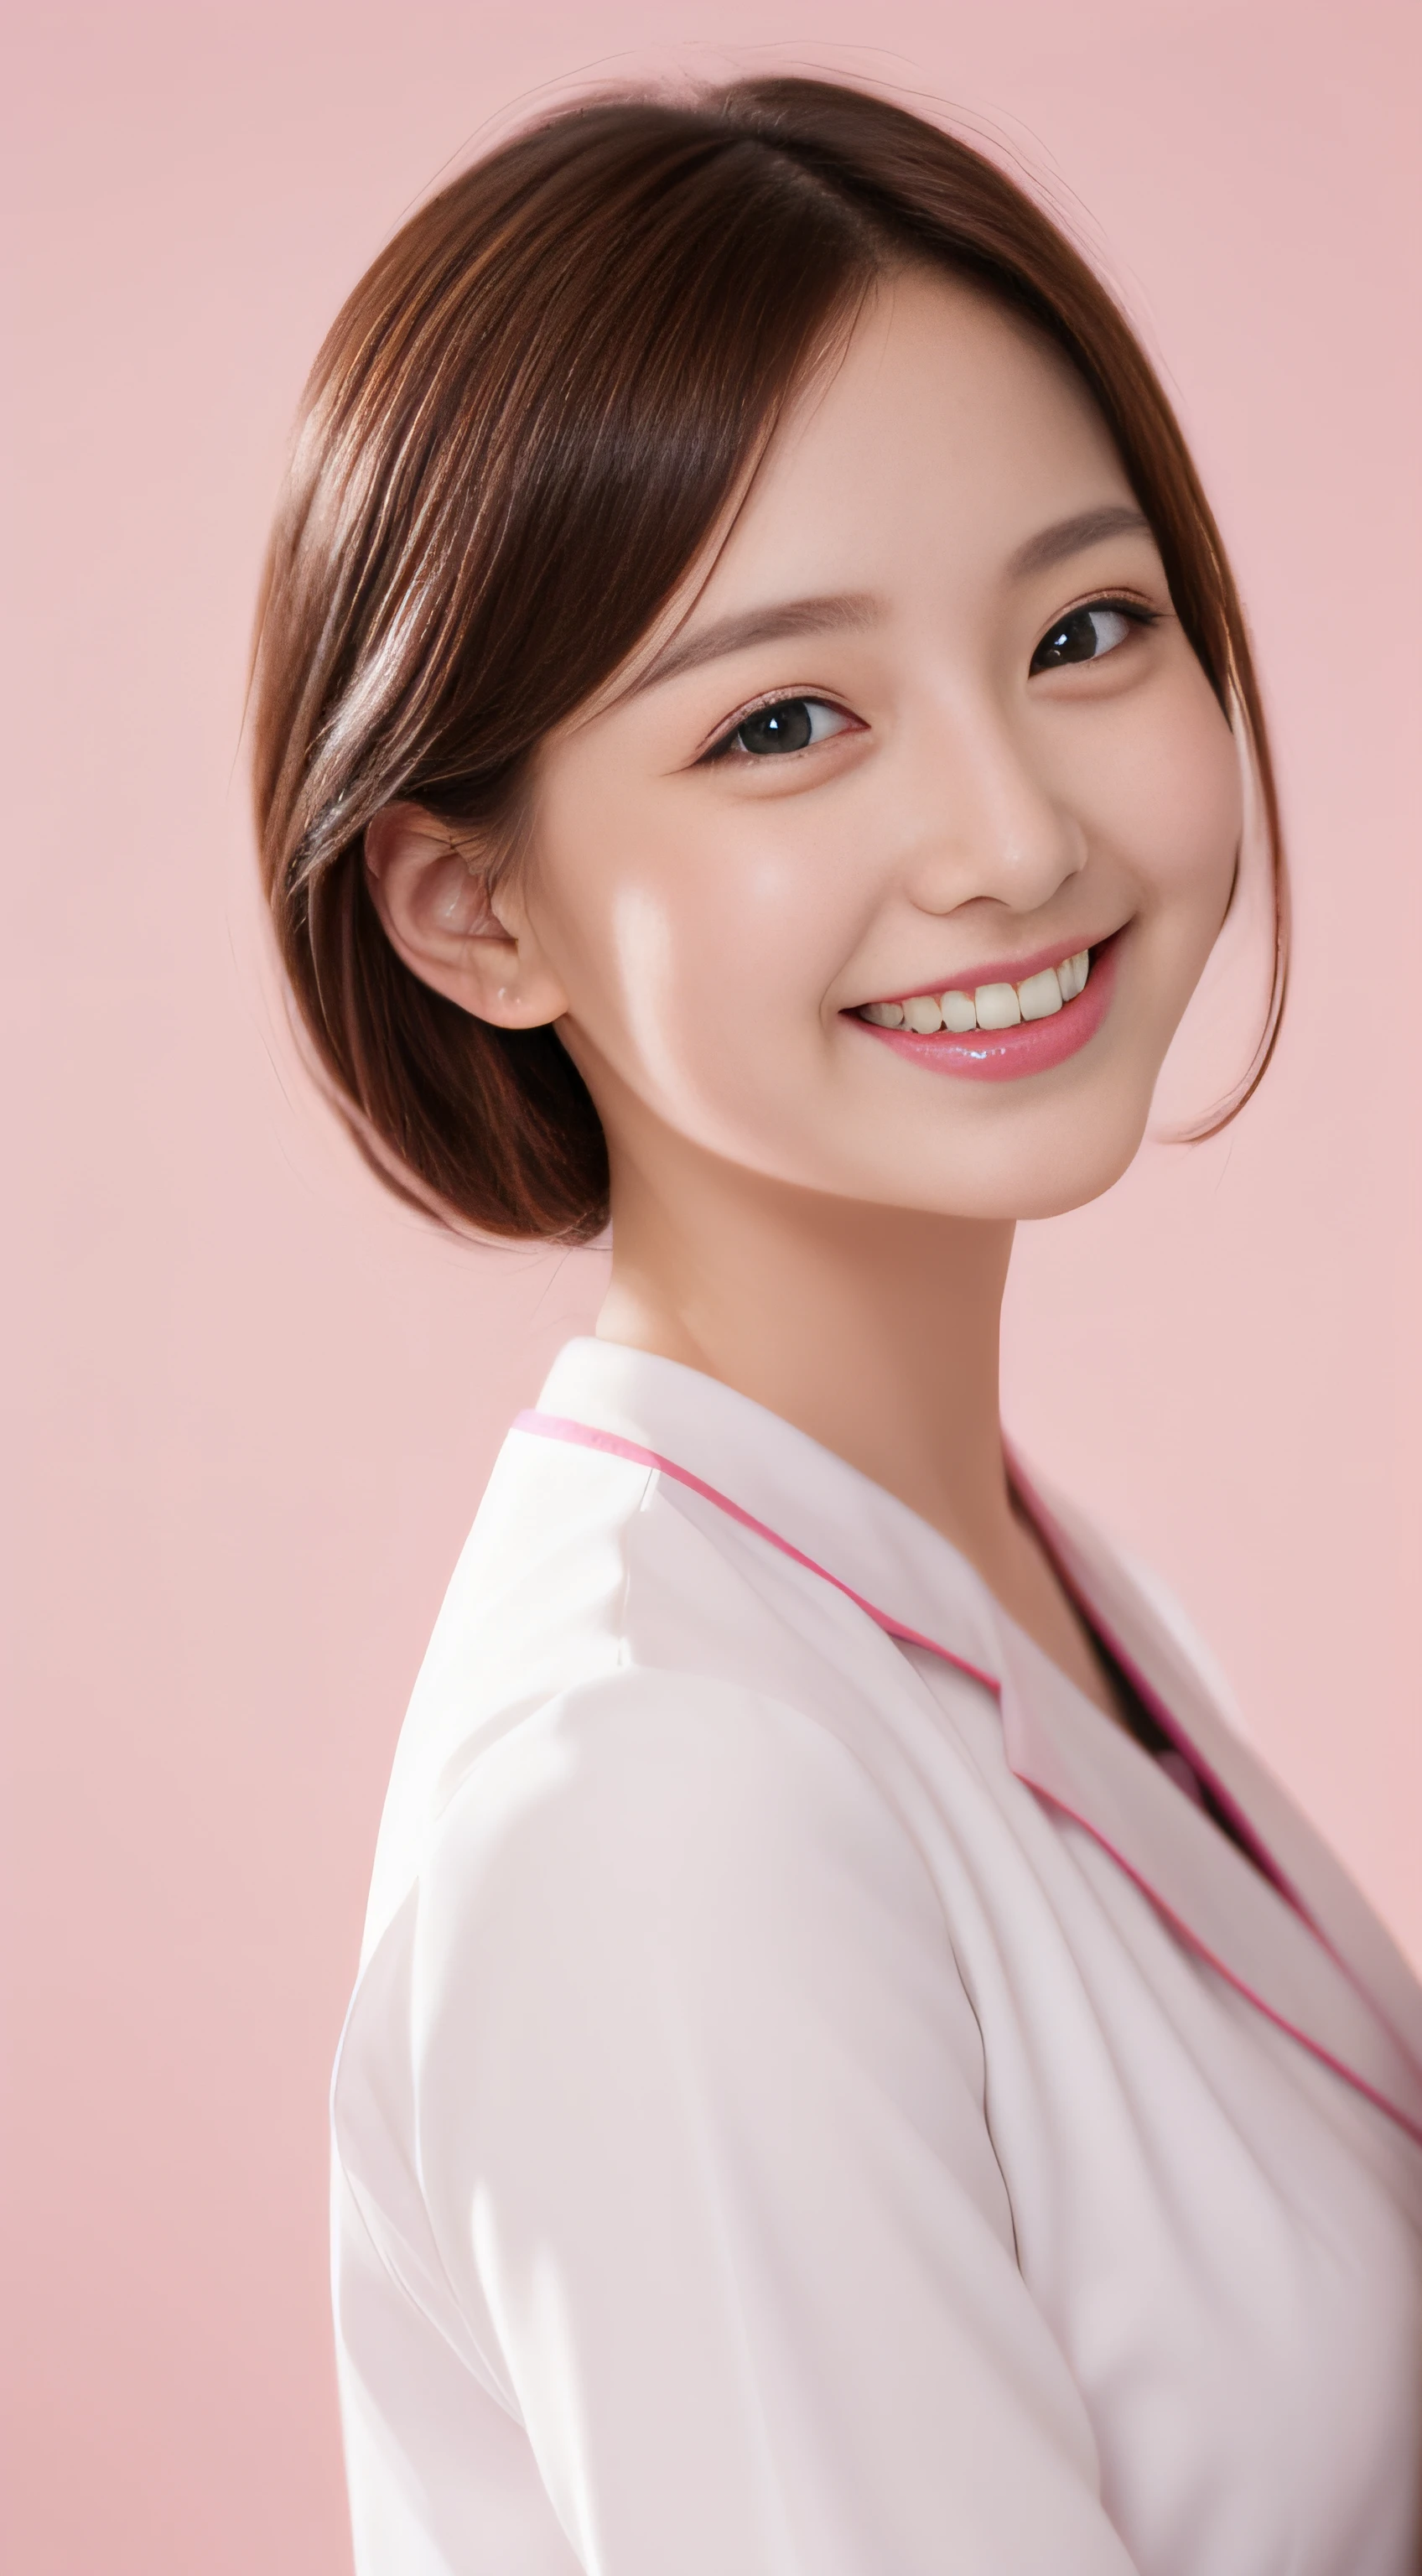 Miss Cabaret、White nurse uniform、２a person、hiquality、A hyper-realistic、healthy、Smiling expression、Slender perfect figure、Japan beauties、beautidful eyes、face perfect、Beautiful skin、Pink background